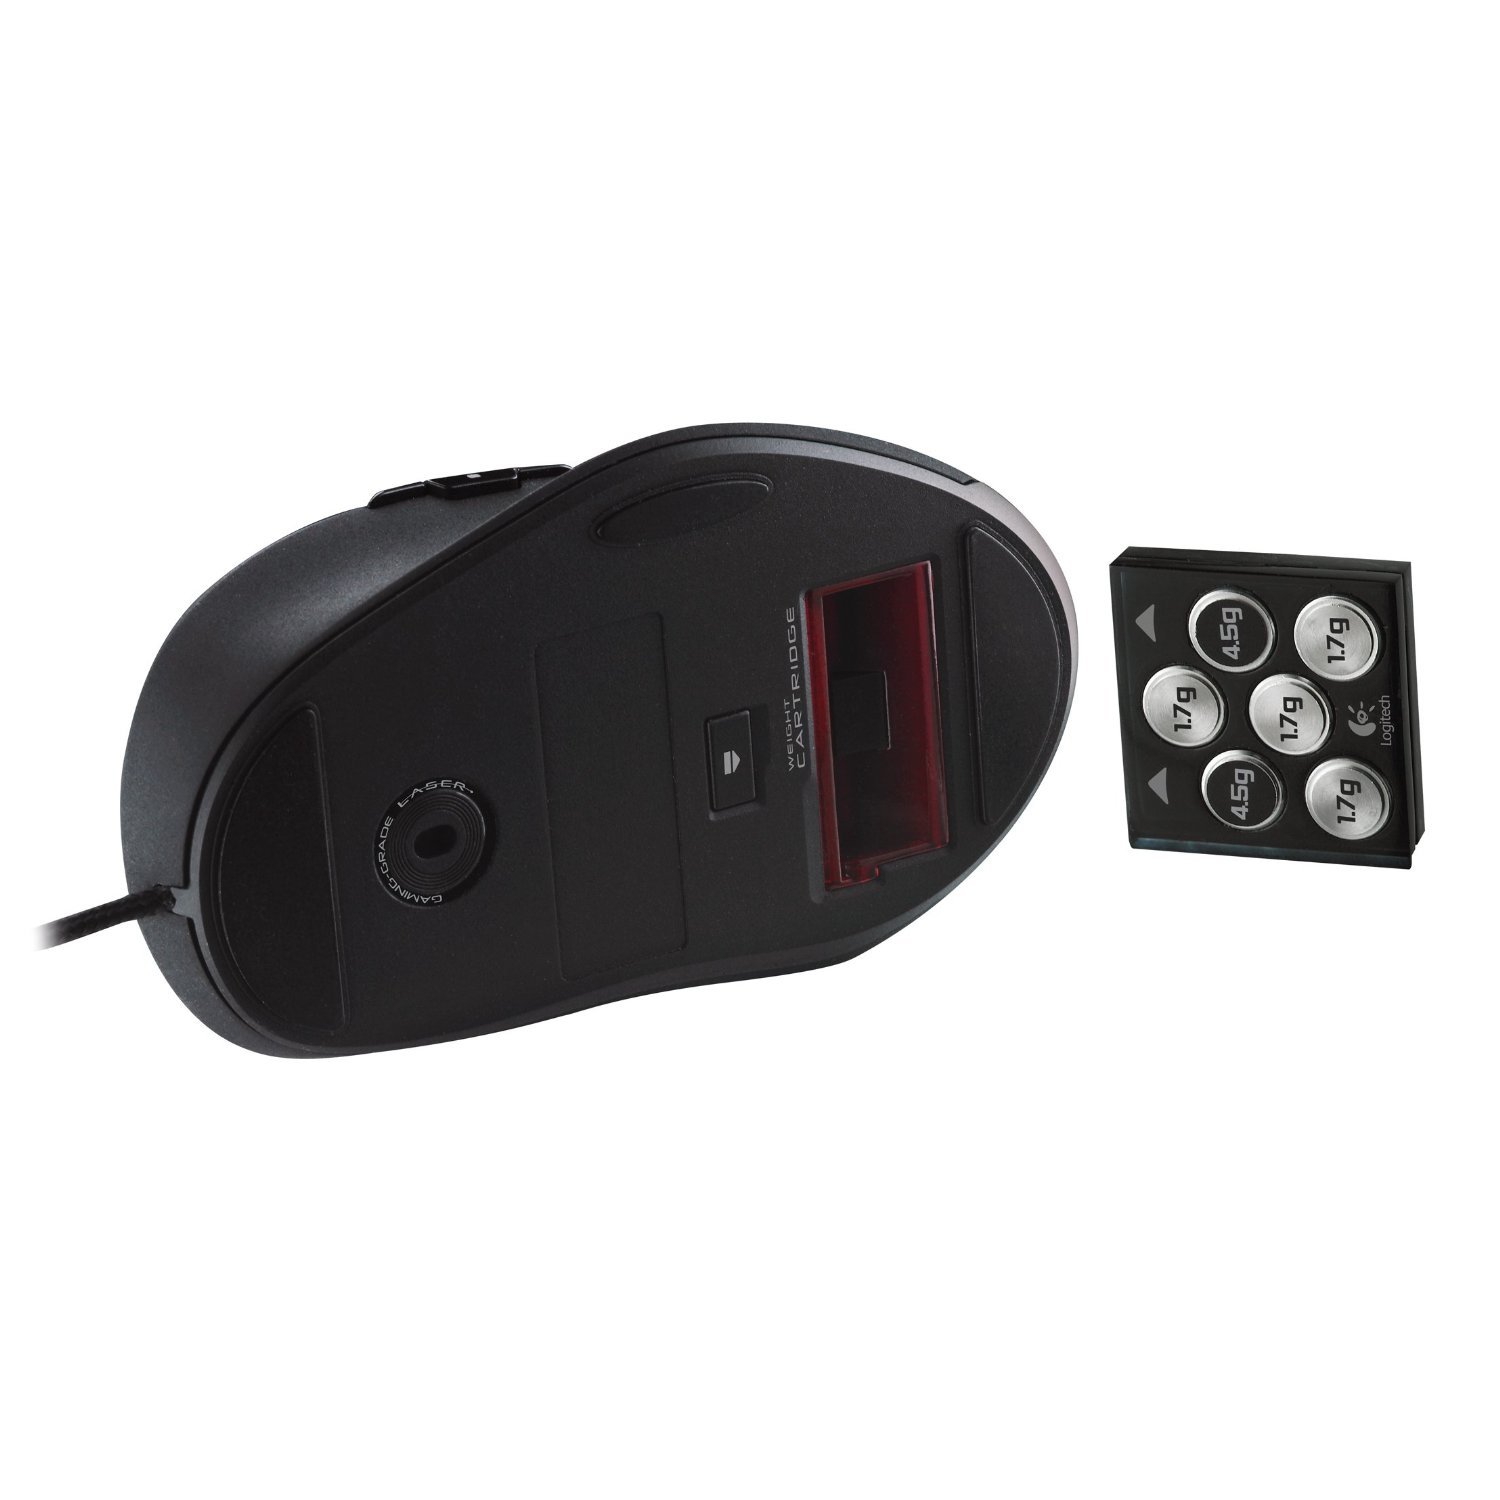 http://thetechjournal.com/wp-content/uploads/images/1110/1317524254-logitech-g500-programmable-gaming-mouse-12.jpg